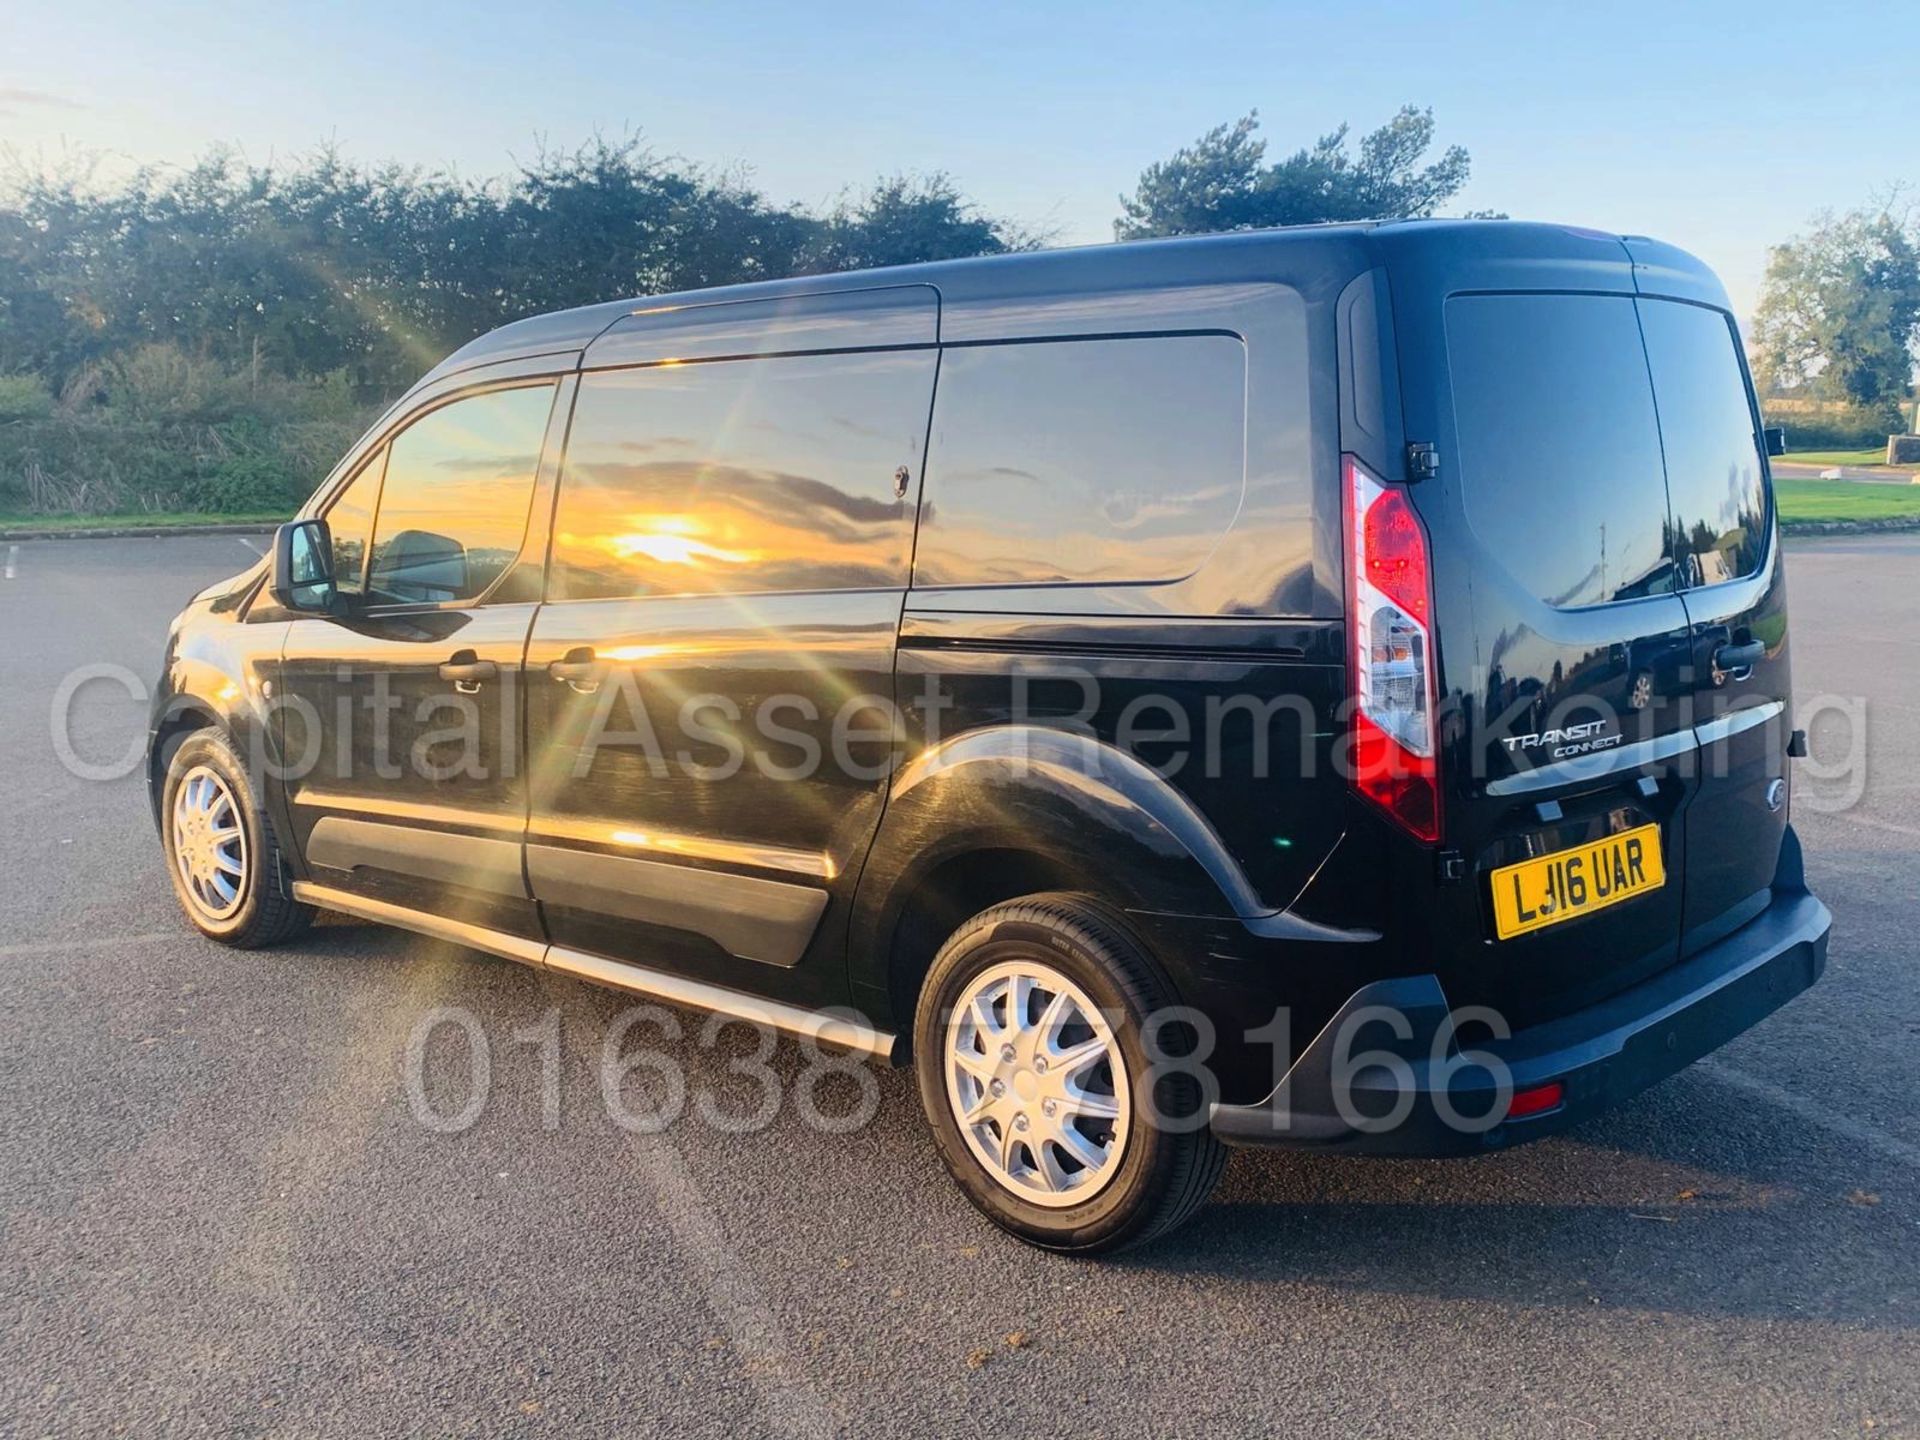 (ON SALE) FORD TRANSIT CONNECT *TREND EDITION* LWB (2016) '1.6 TDCI -95 BHP' **AIR CON** (3 SEATER) - Image 8 of 32